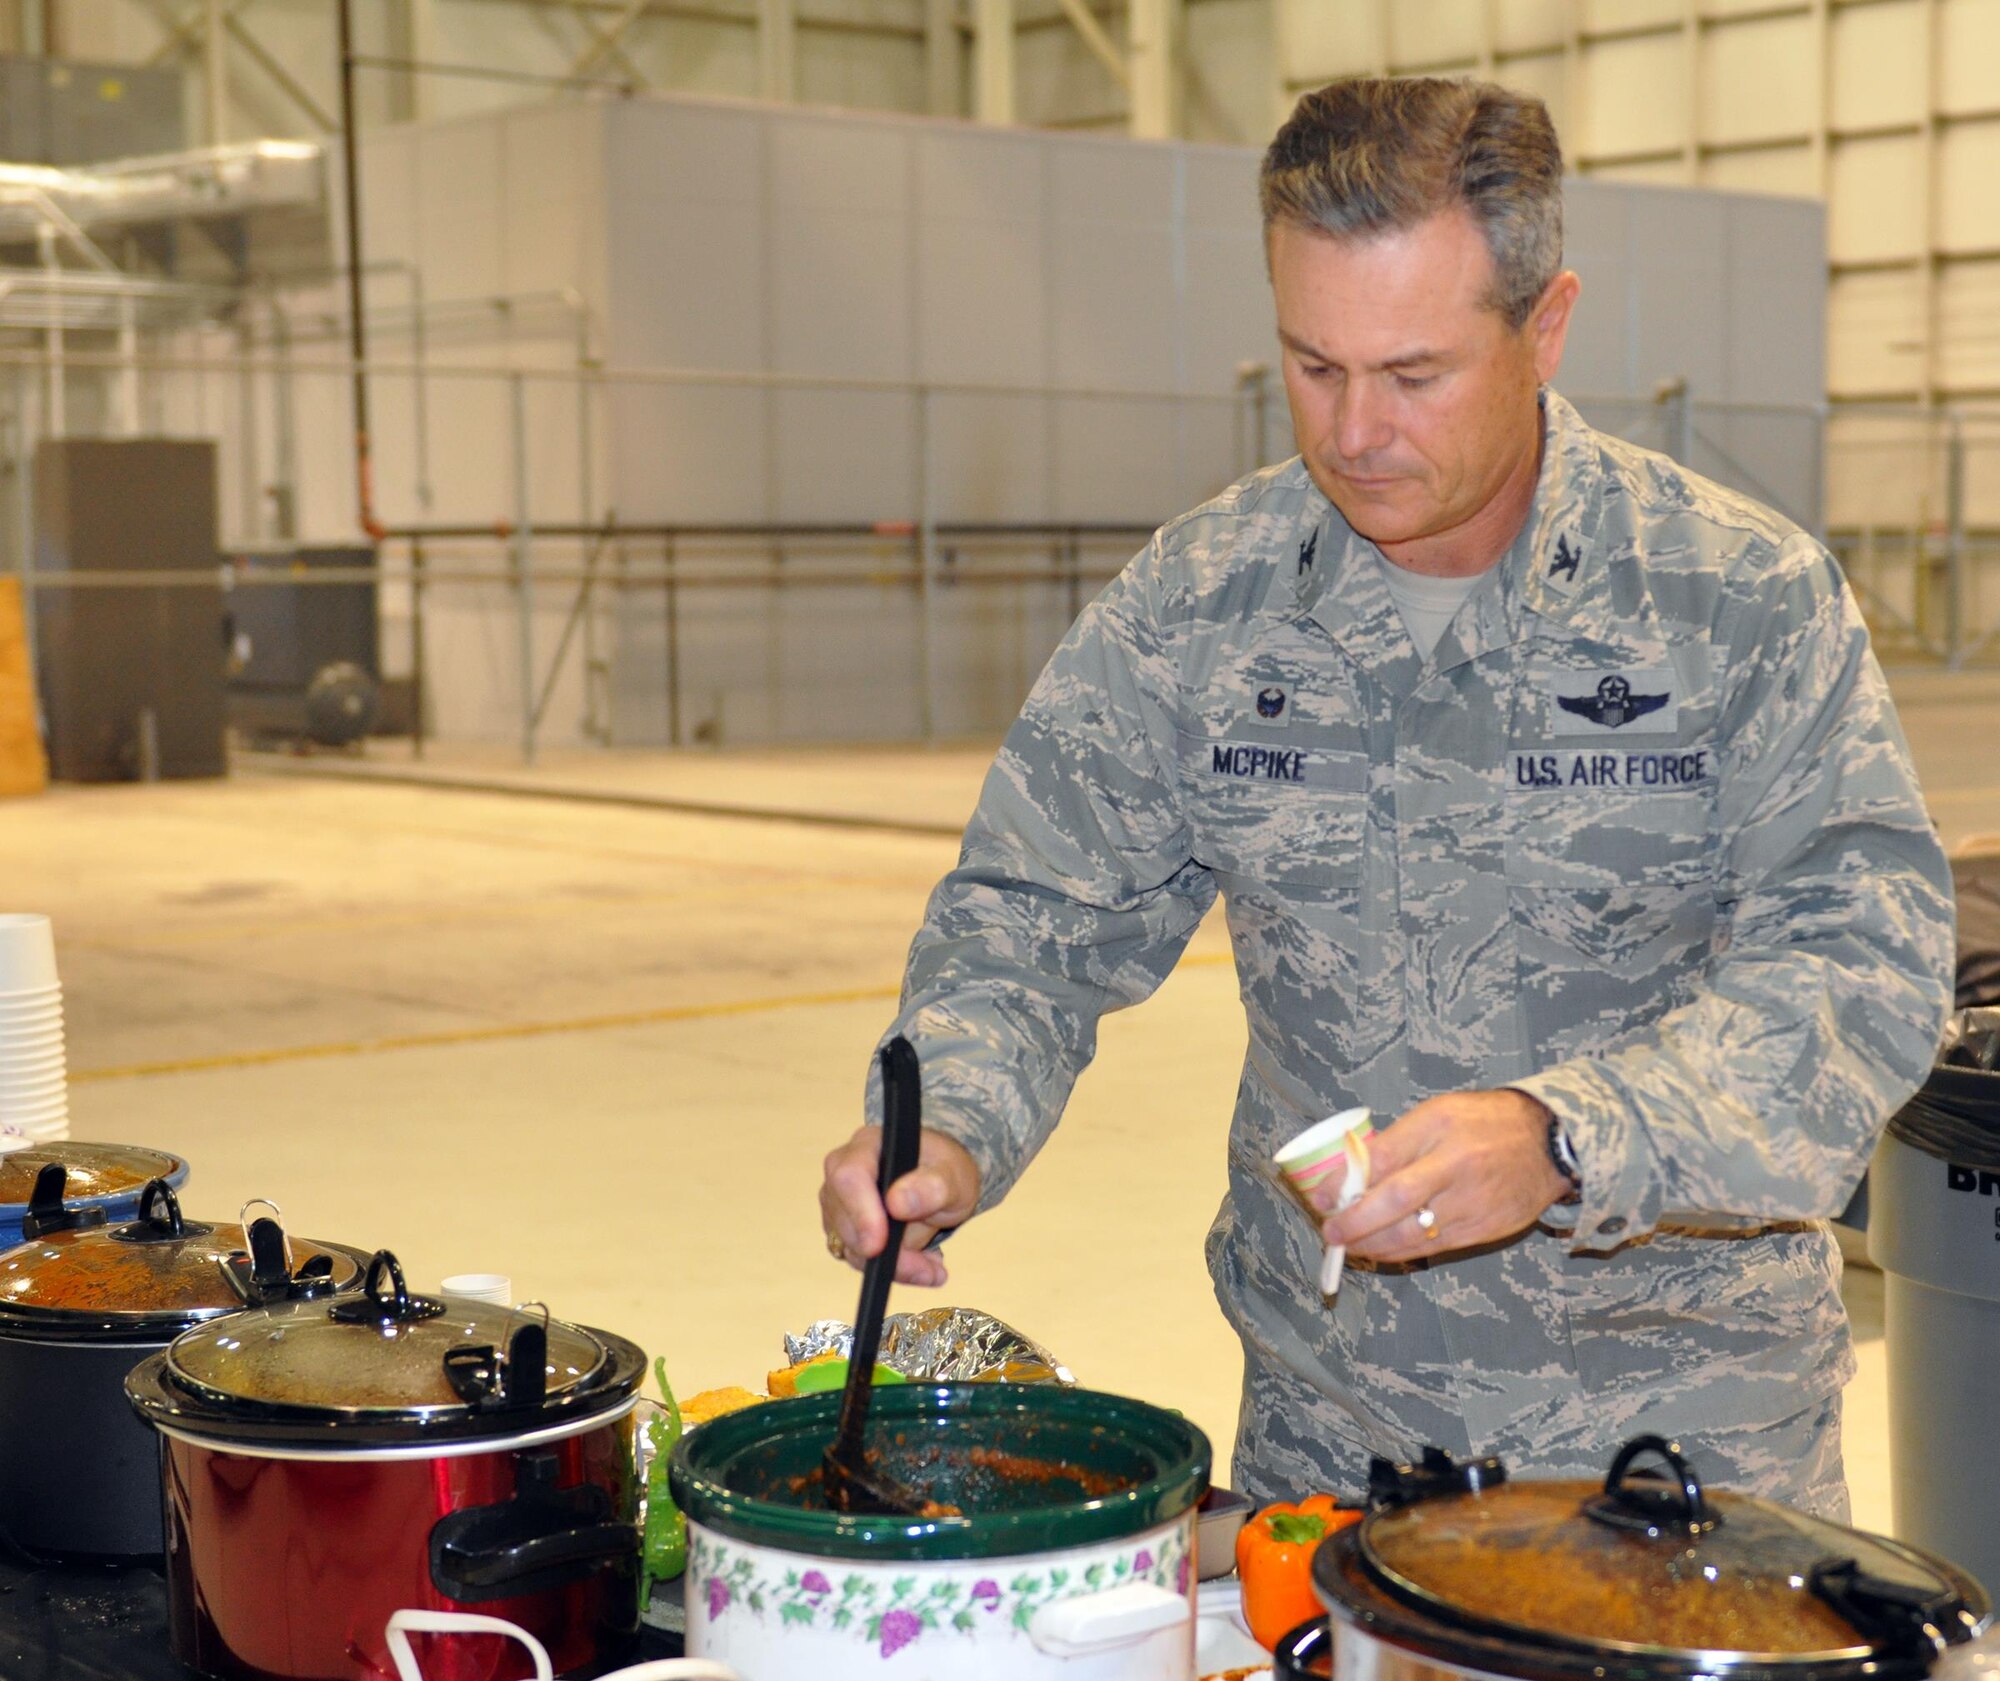 Col. Craig McPike, 445th Operations Group commander, prepares to sample one of 17 pots of chili while serving as a judge during the 445th Airlift Wing’s 16th Annual Chili Cook-off Oct. 27, 2016. The event raised $400 for the Combined Federal Campaign. (U.S. Air Force photo/Stacy Vaughn)    